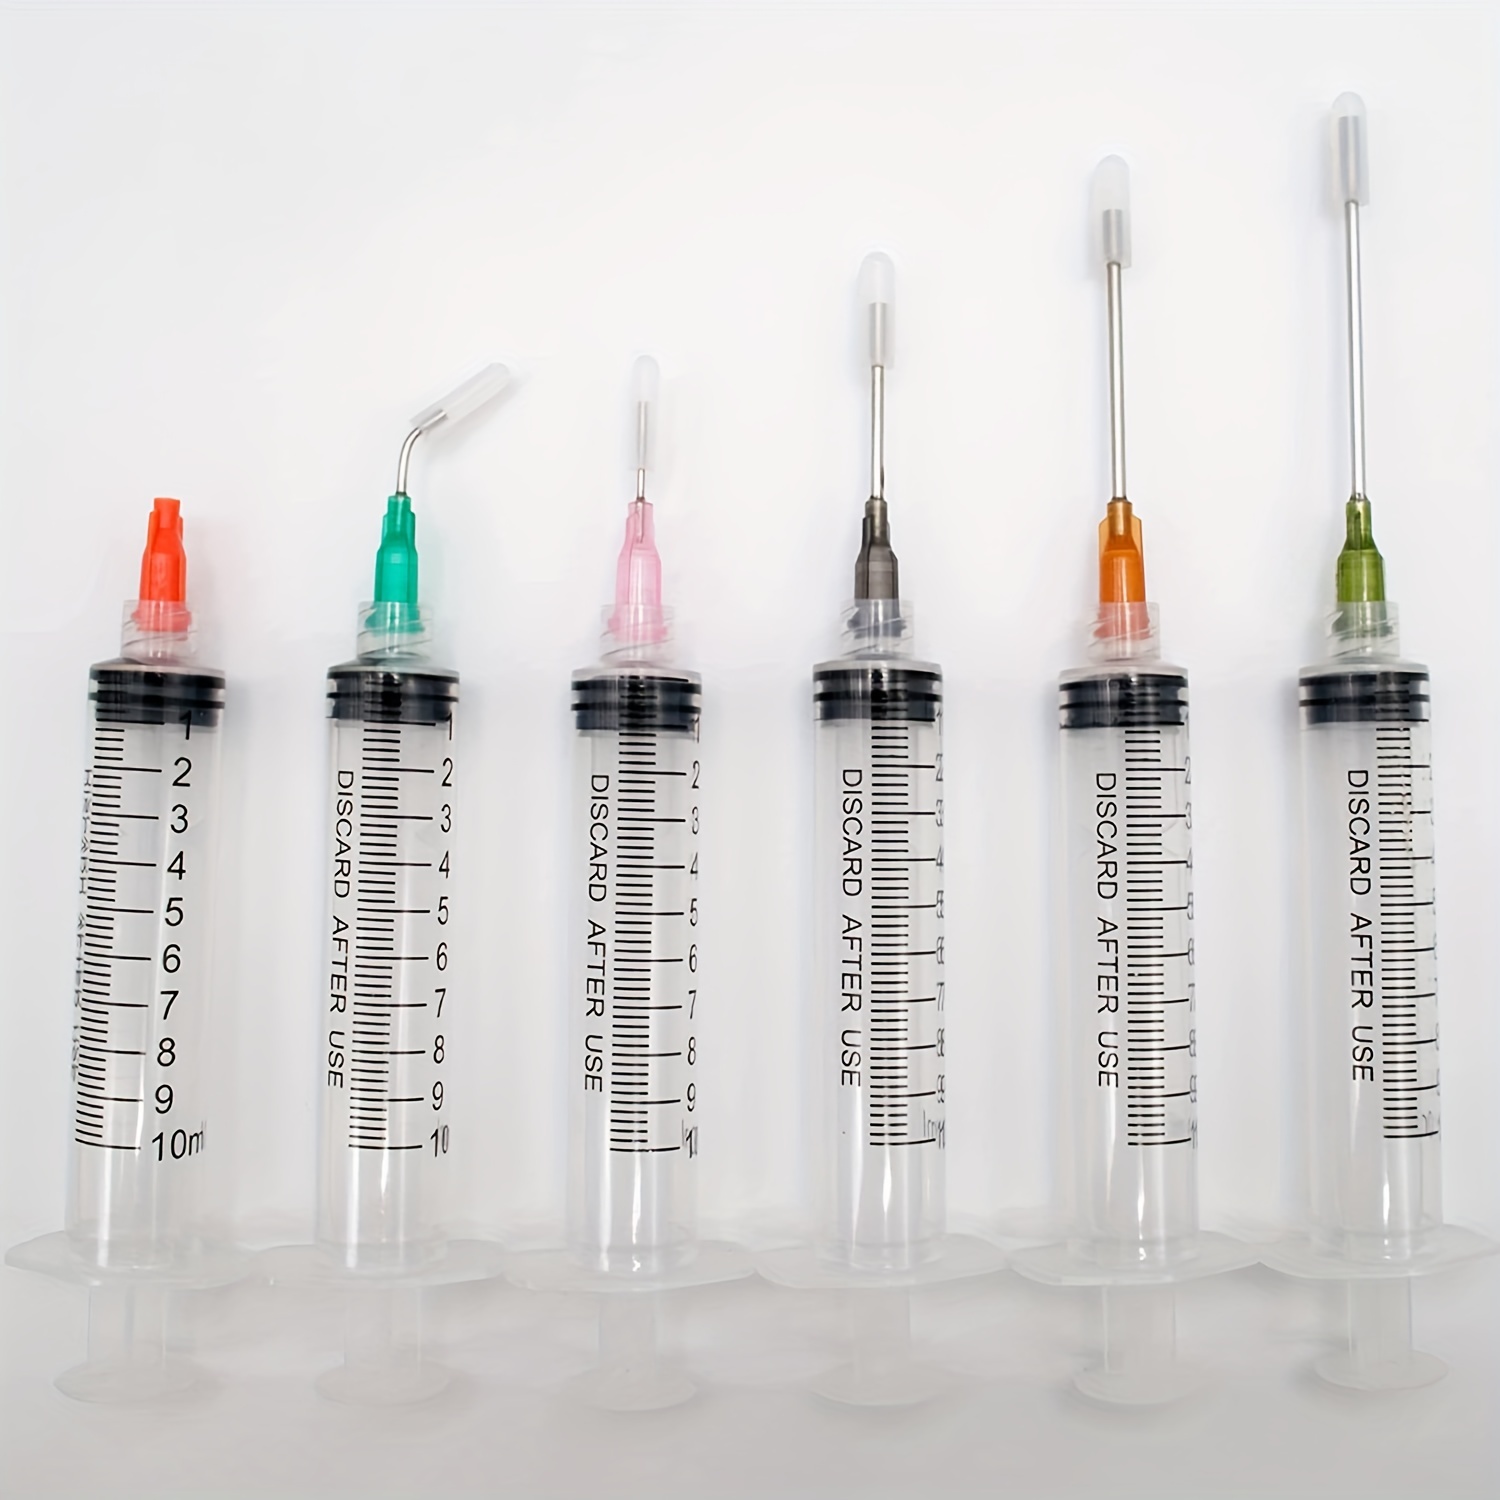 Dispense All - Mini Industrial Syringe Pack - 10ml Luer Lock Syringes, 14  and 18 Gauge Blunt Needles, Covers and Syringe Caps | Precision Crafting